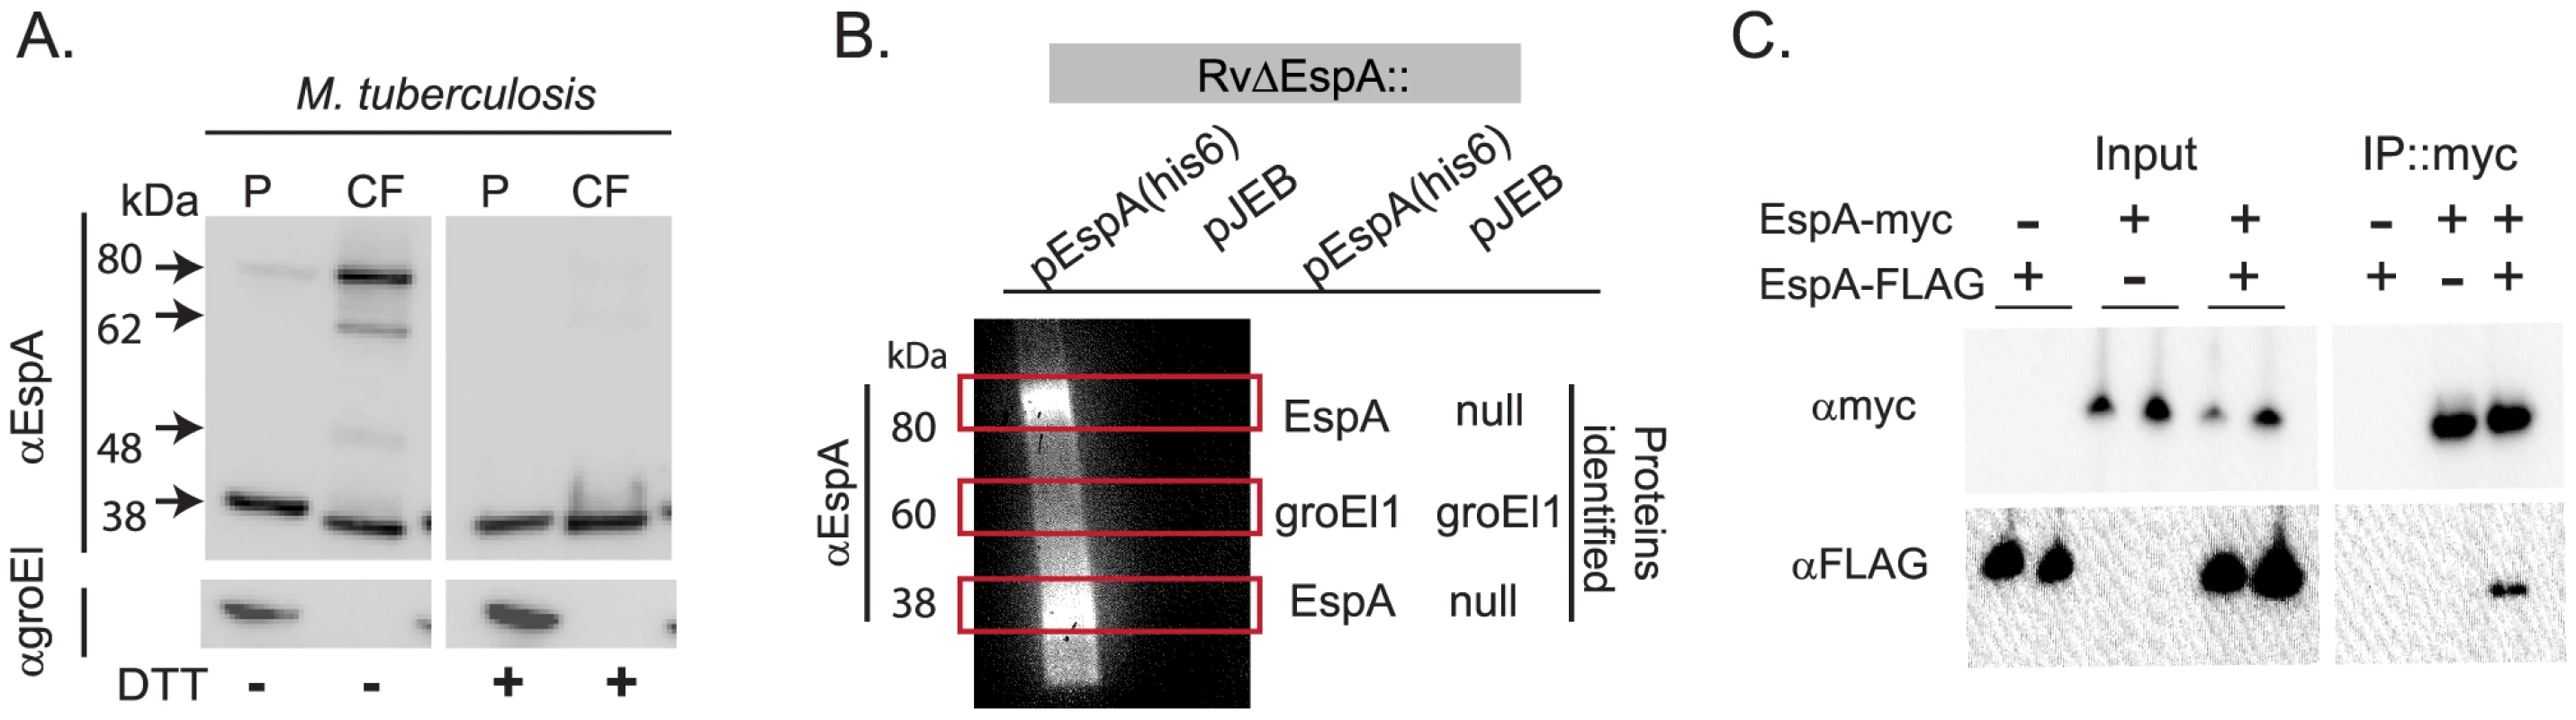 EspA forms disulfide dependent homodimers in wildtype <i>Mtb</i>.